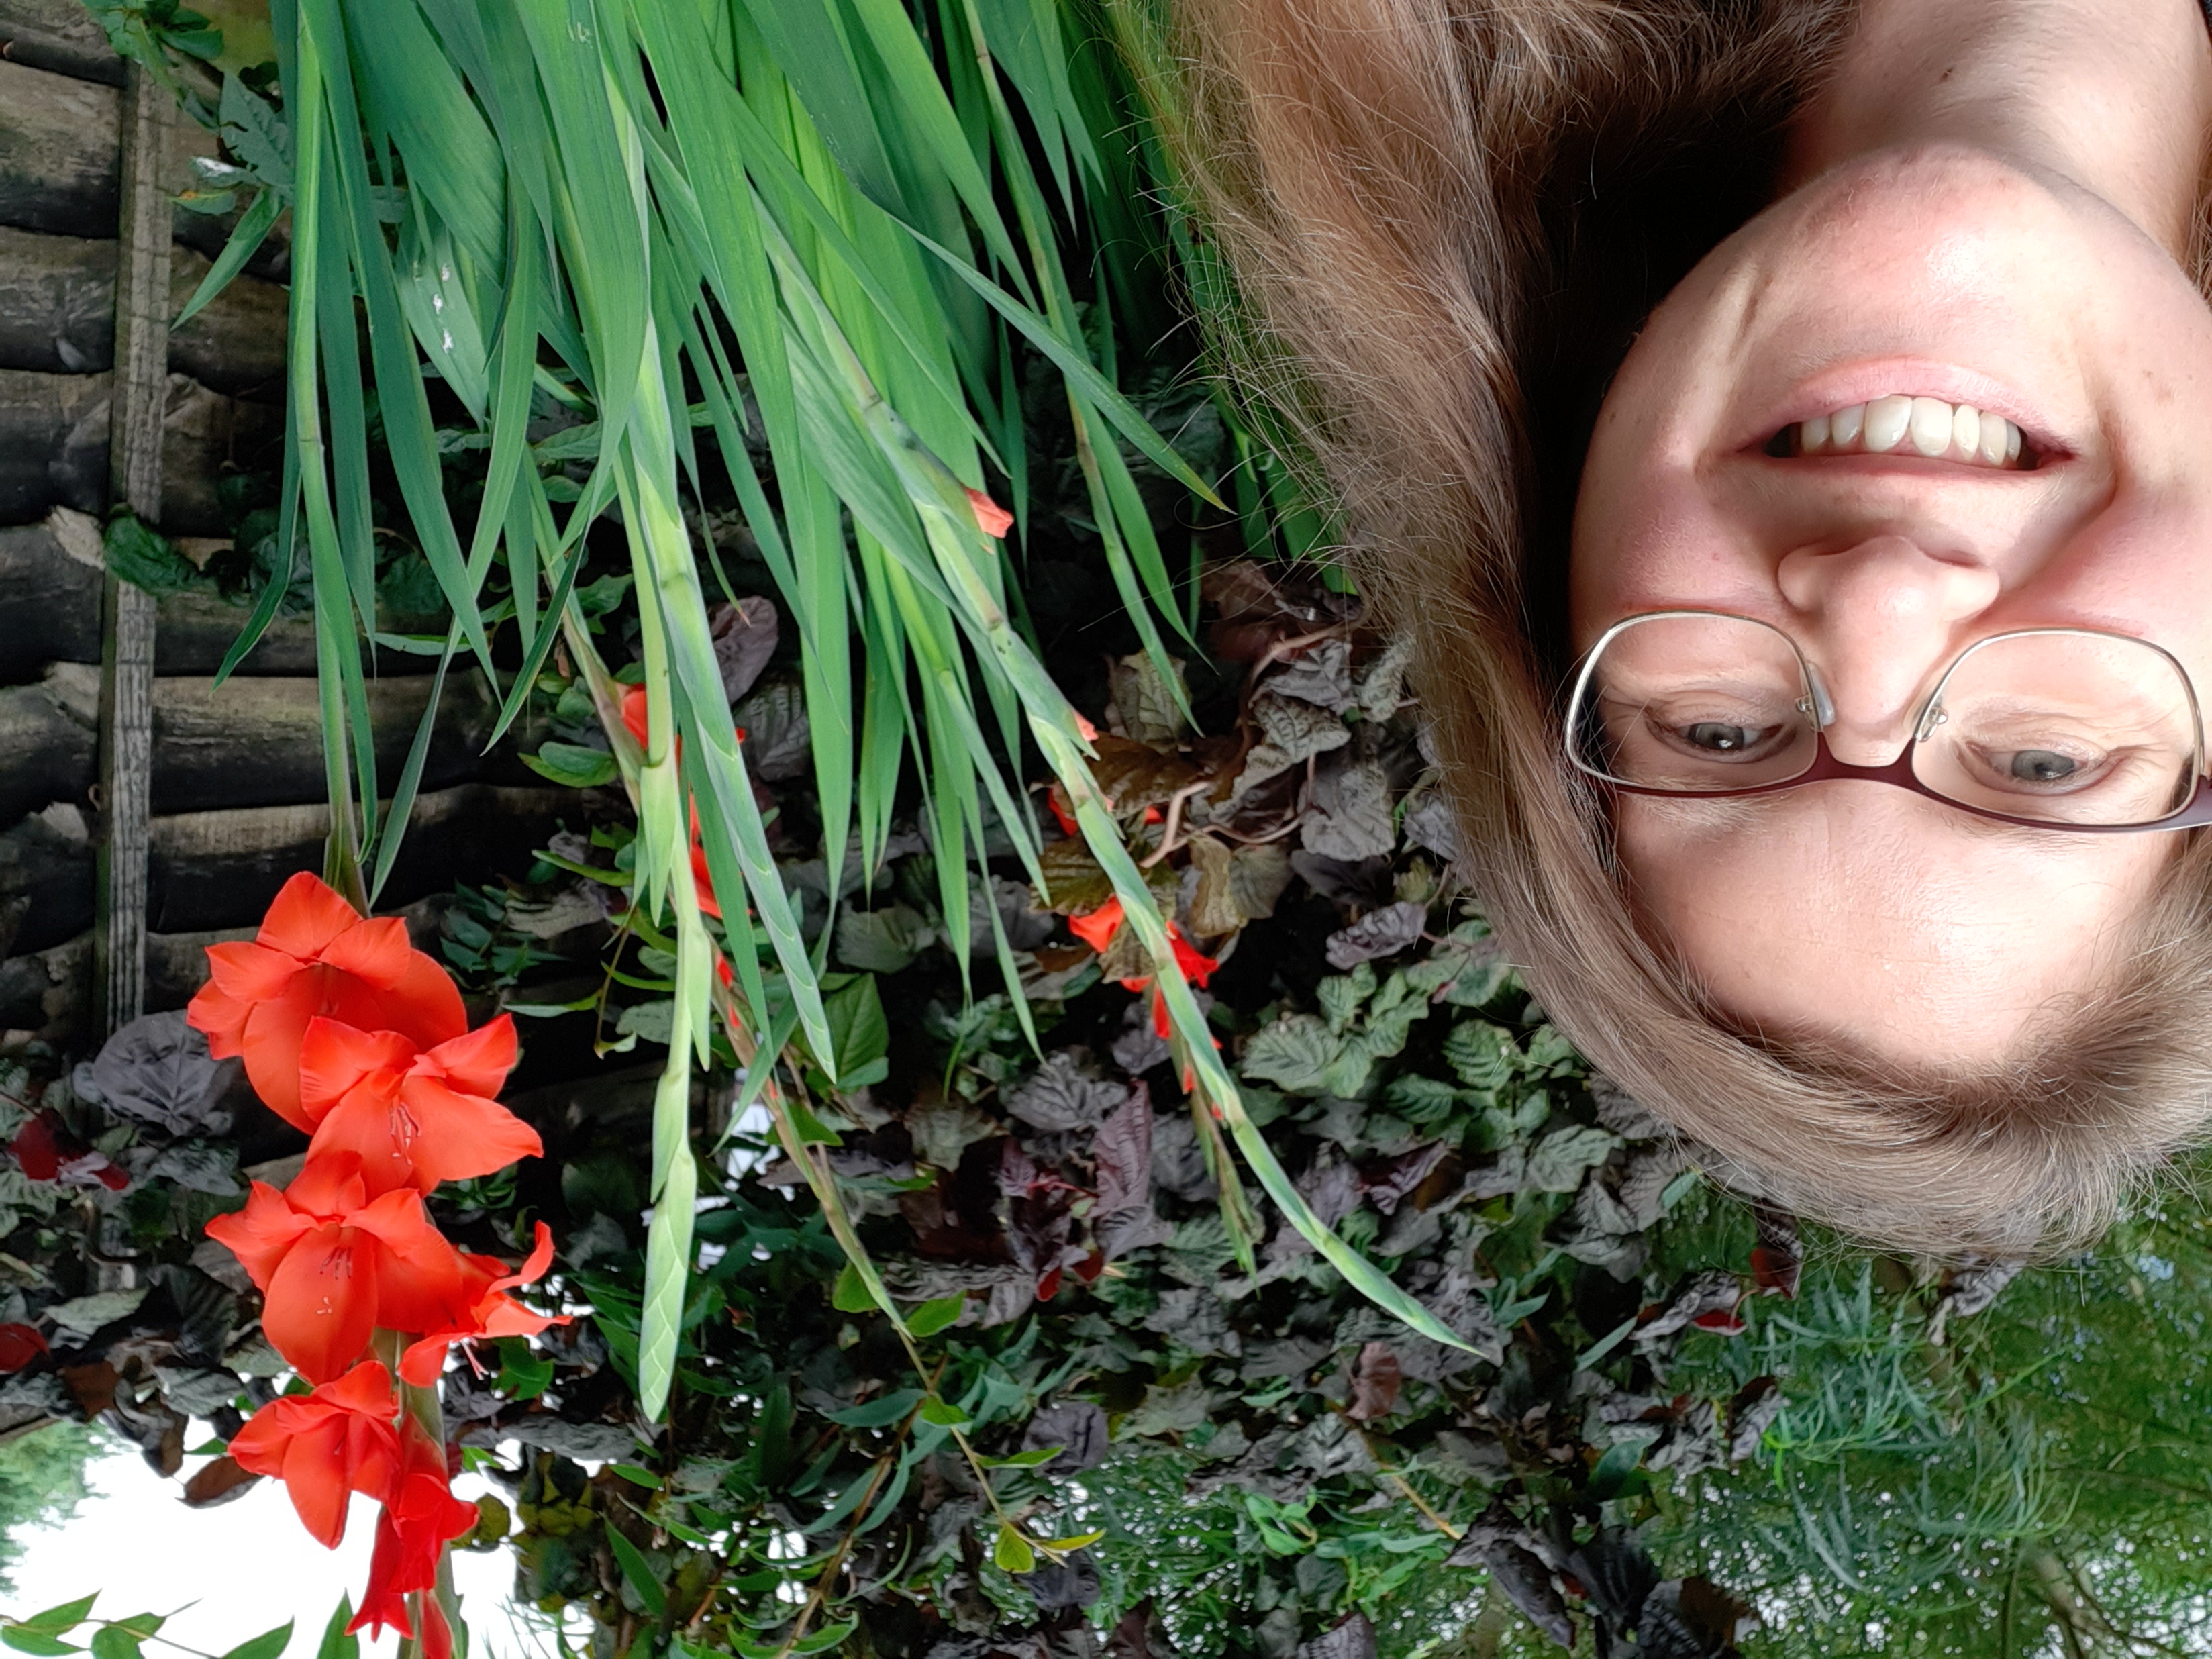 A photo of me smiling in my garden, next to some beautiful red flowers